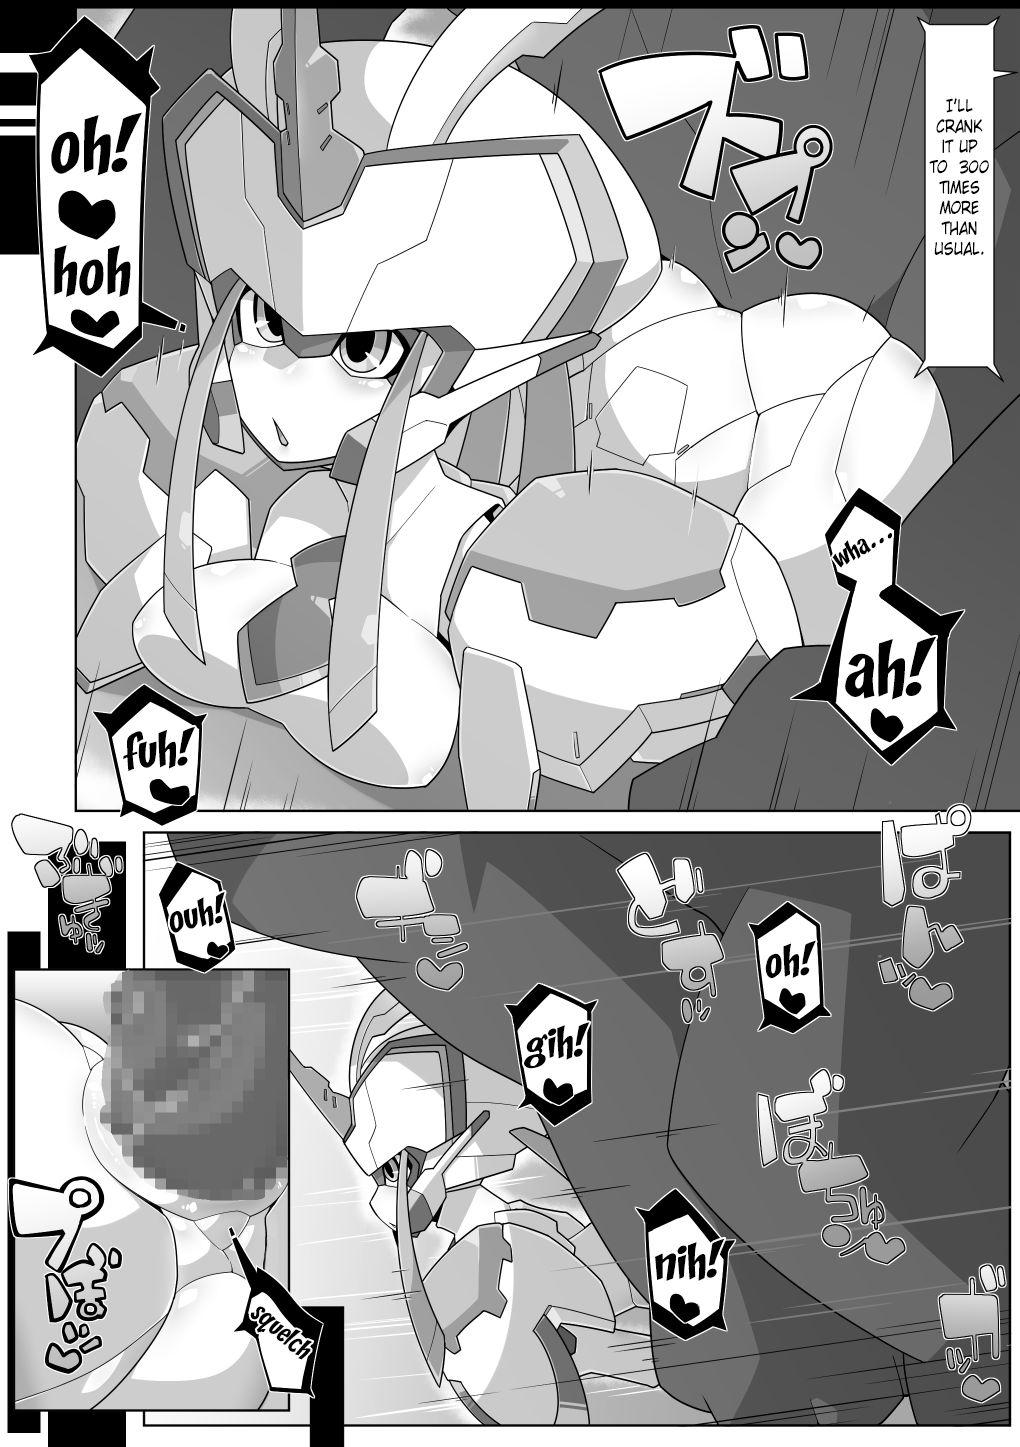 Hiddencam (C94) [Workaholic (Kni)] robo-hentai-book - Darling in the franxx Ikillitts - Page 4